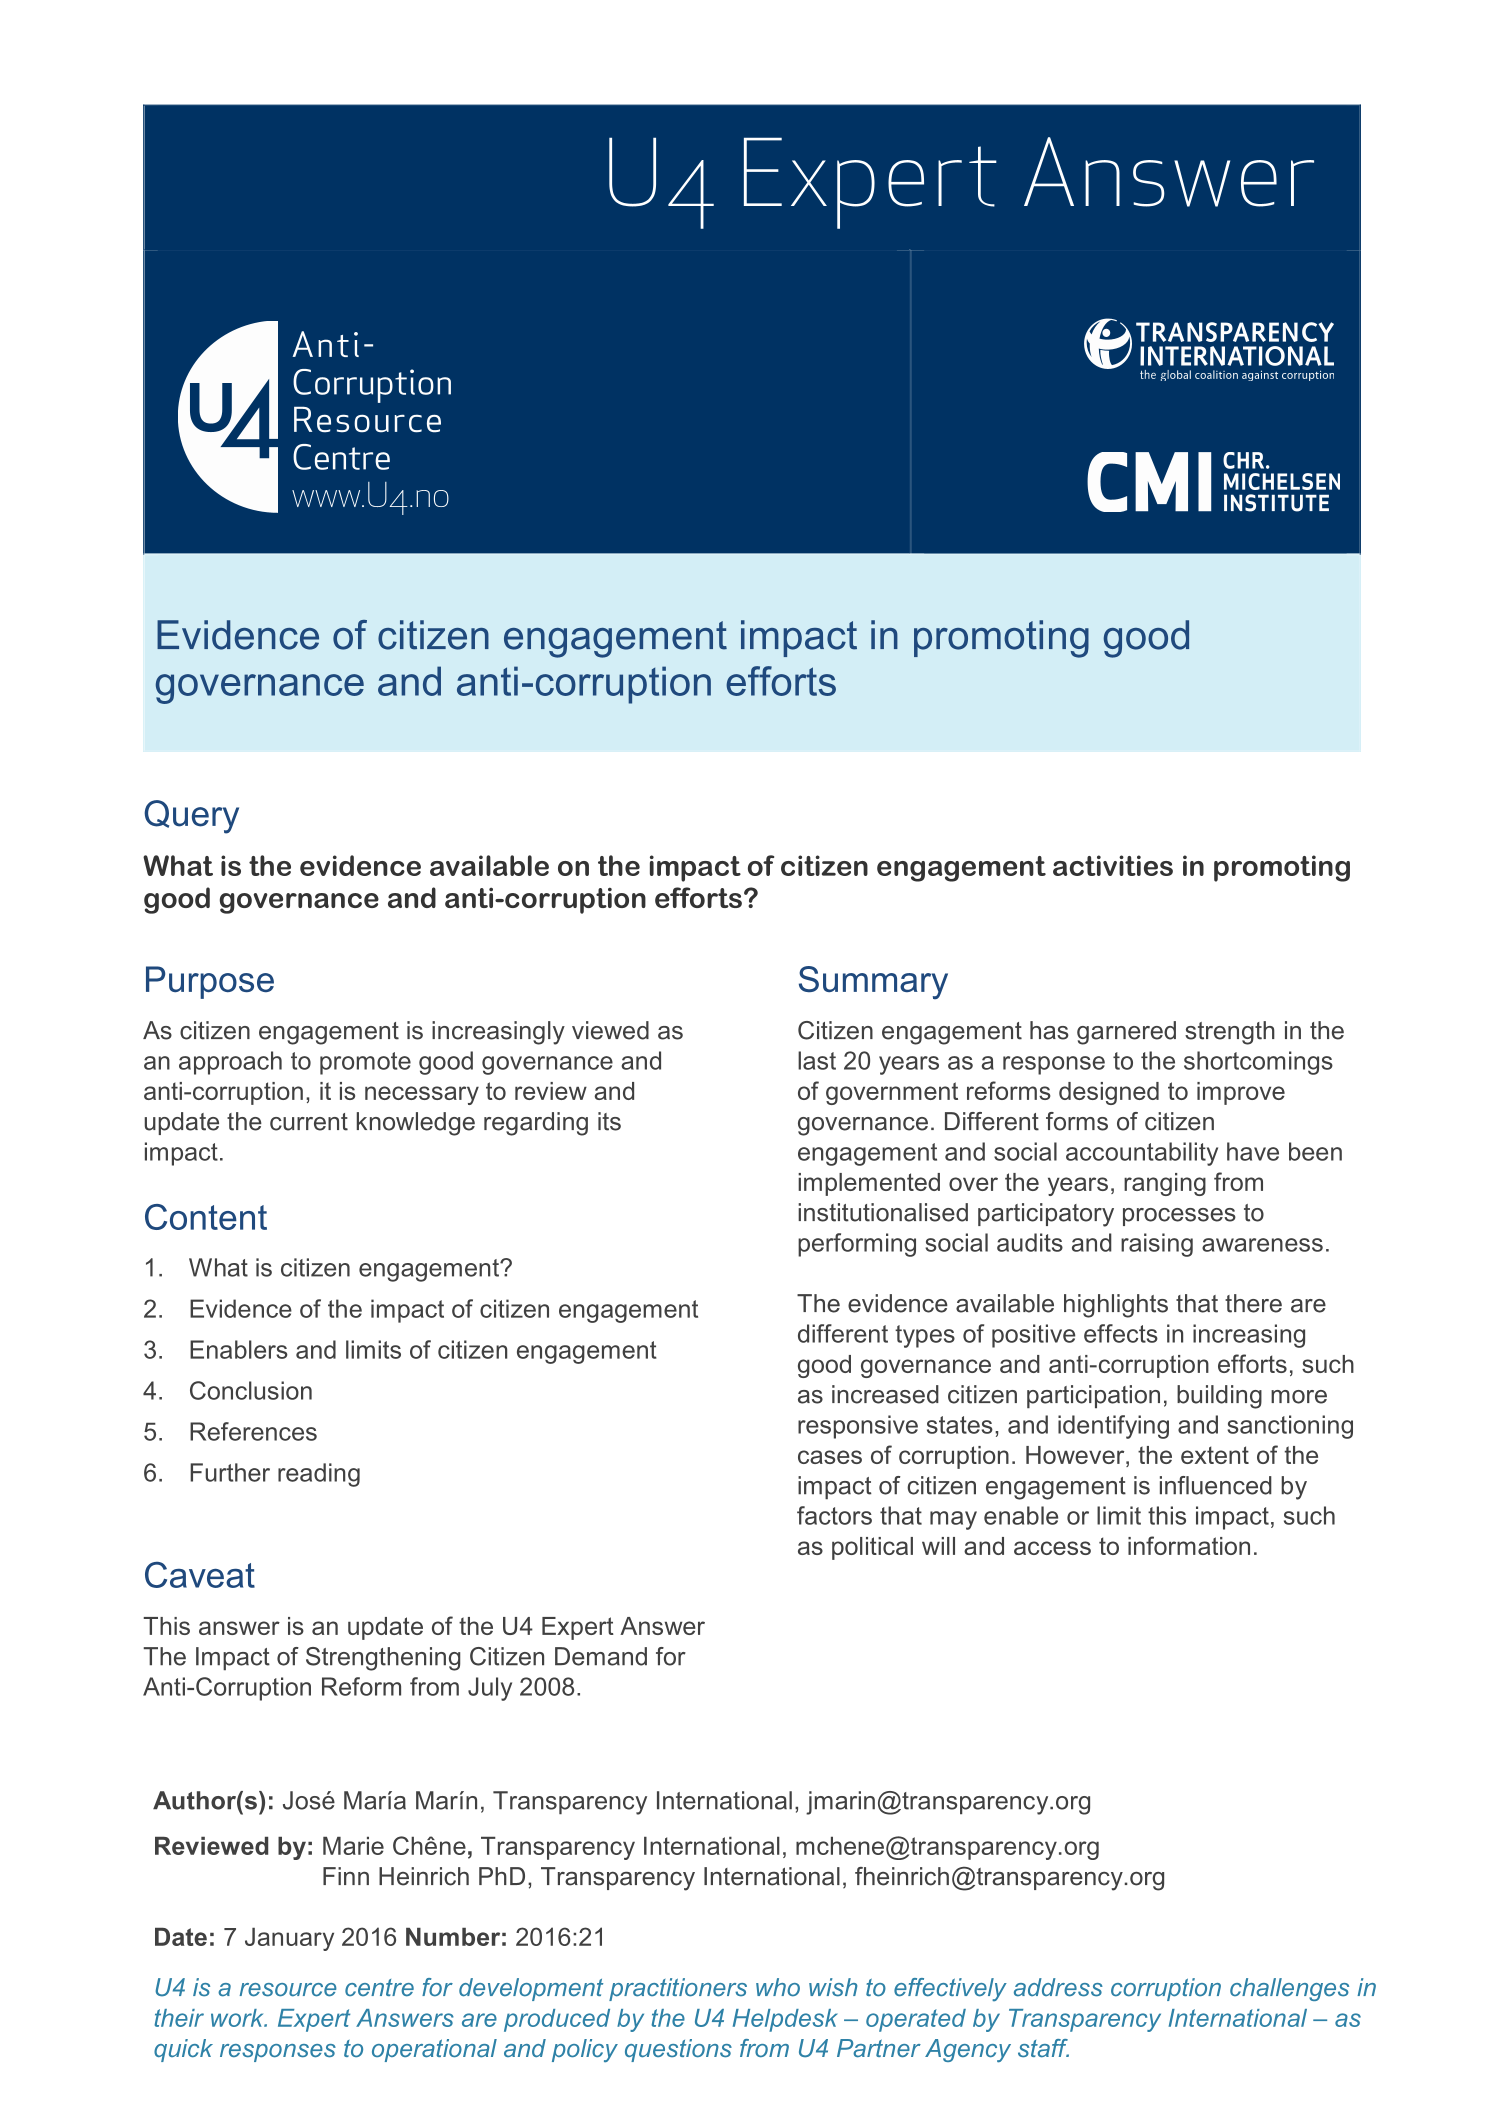 Evidence of citizen engagement impact in promoting good governance and anti-corruption efforts